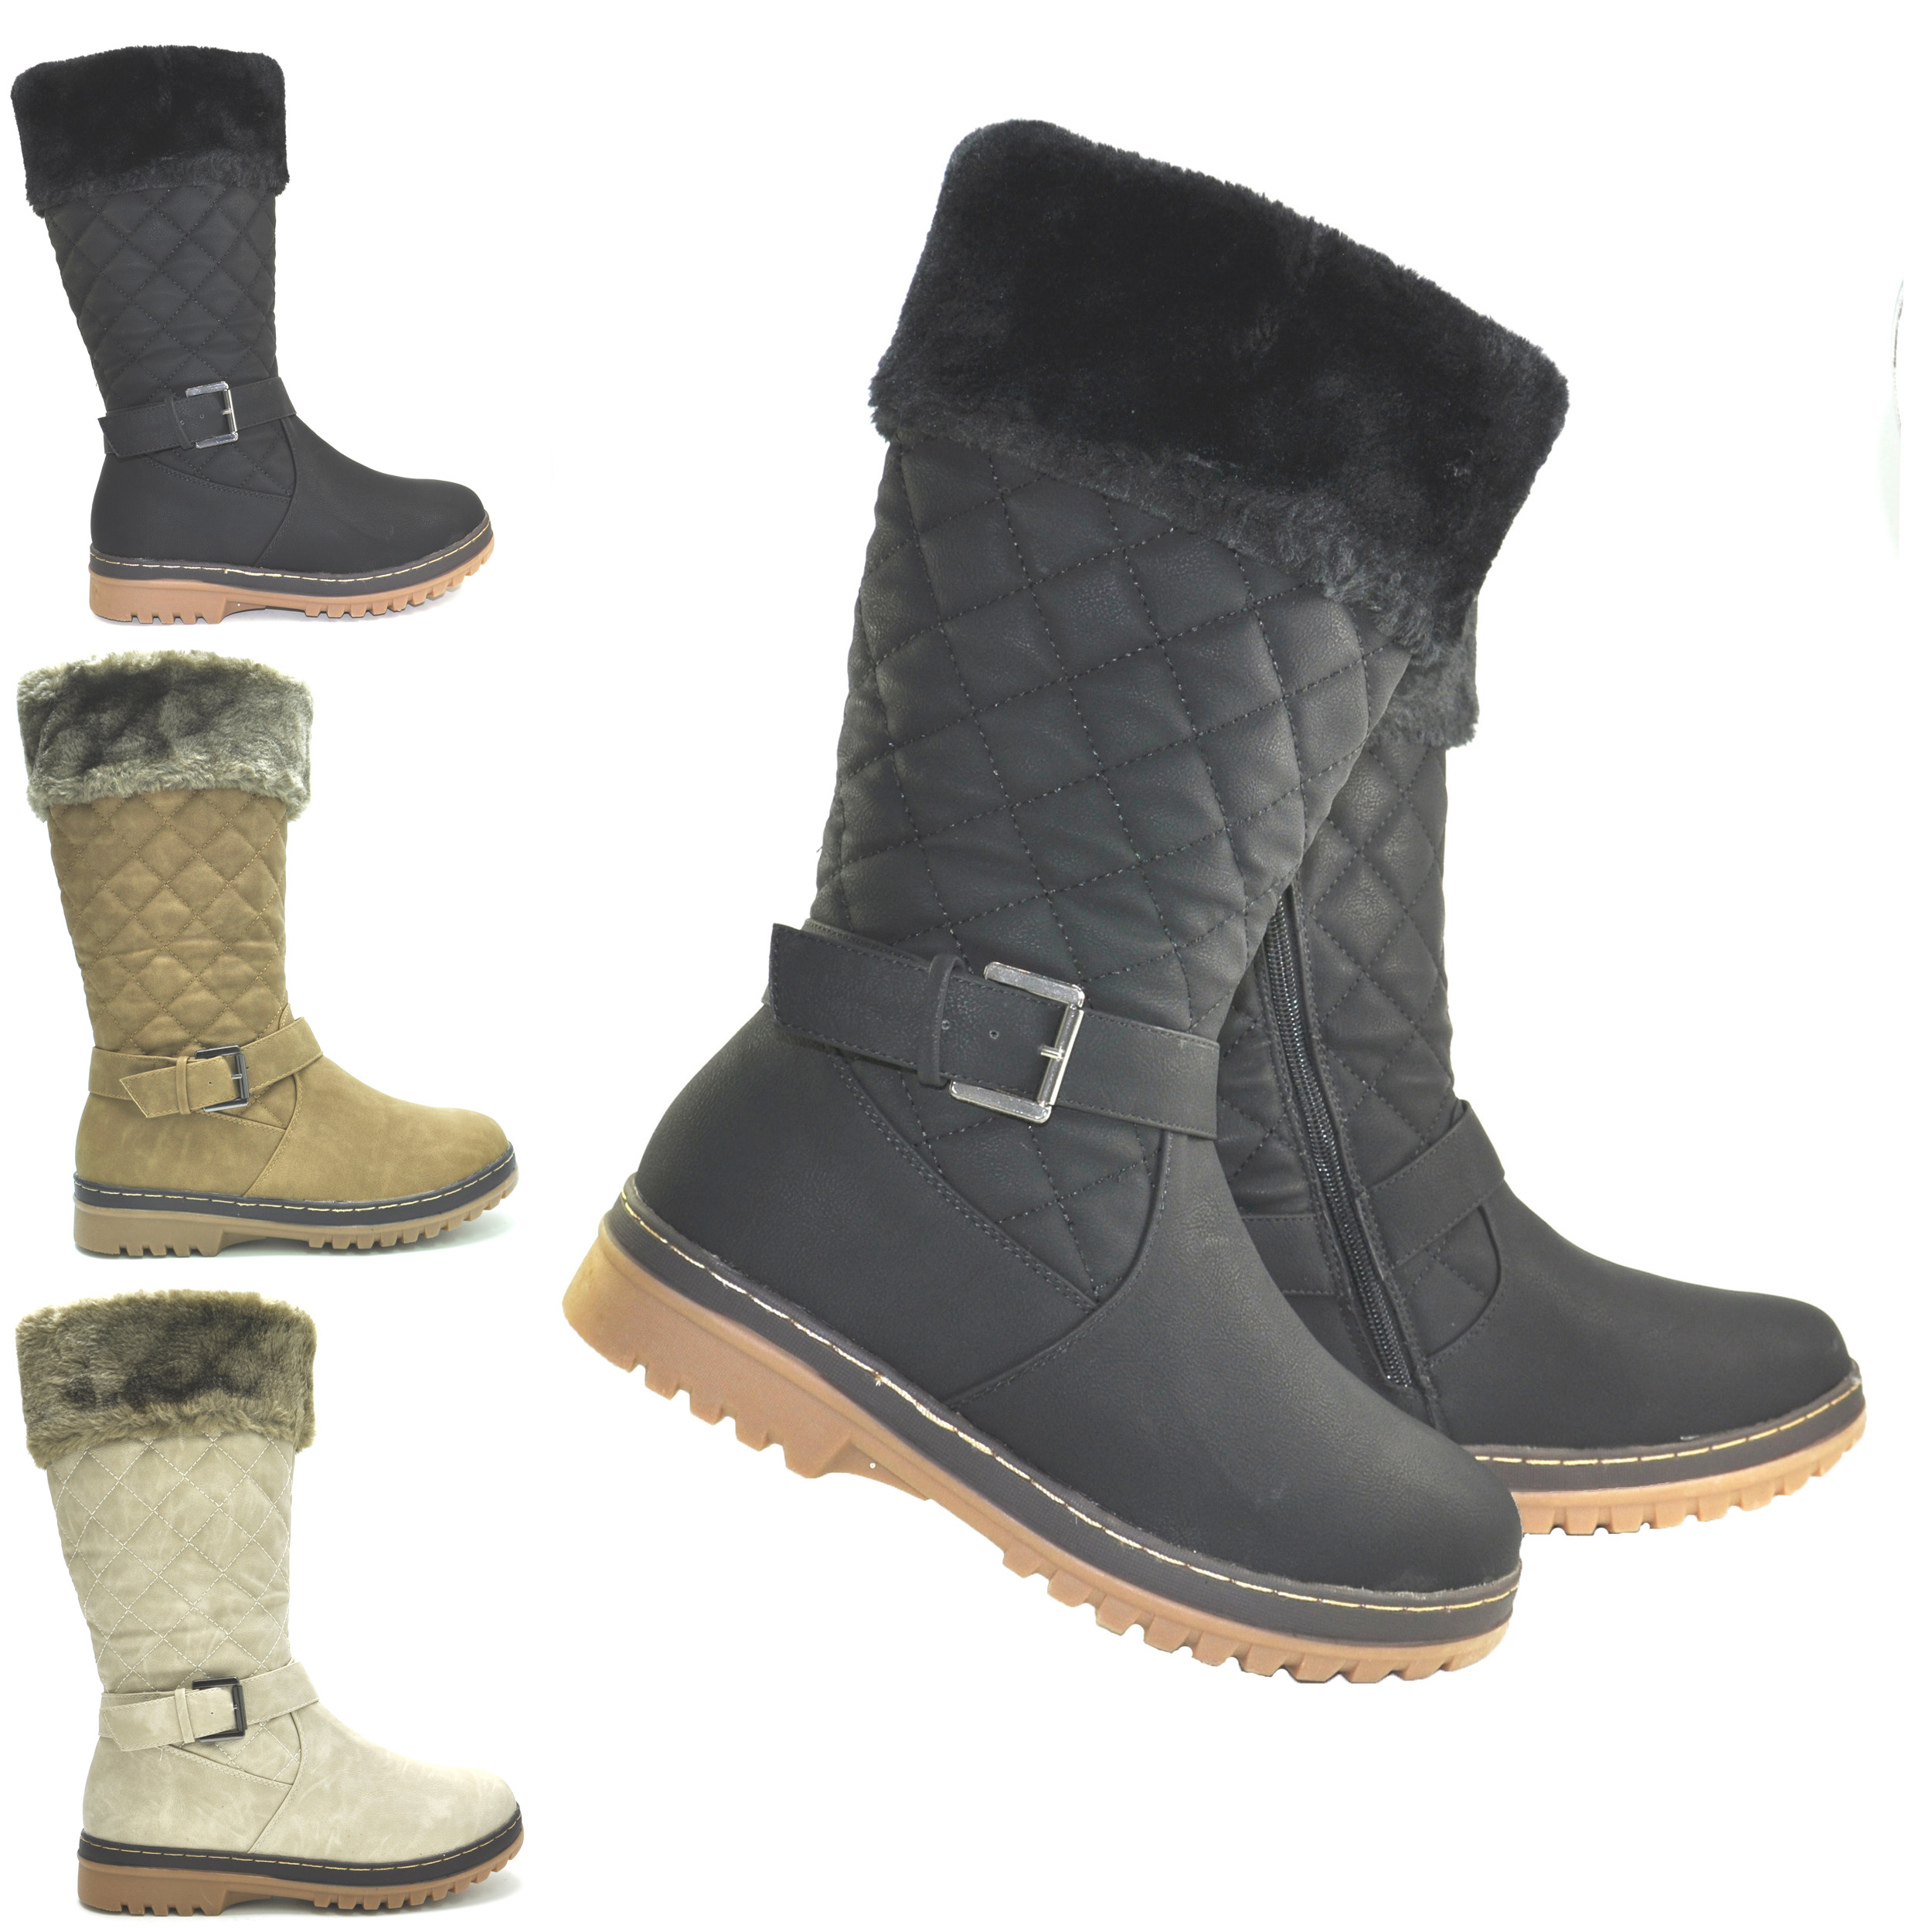 Fur Lined Boots: Wear Them in The Best Way